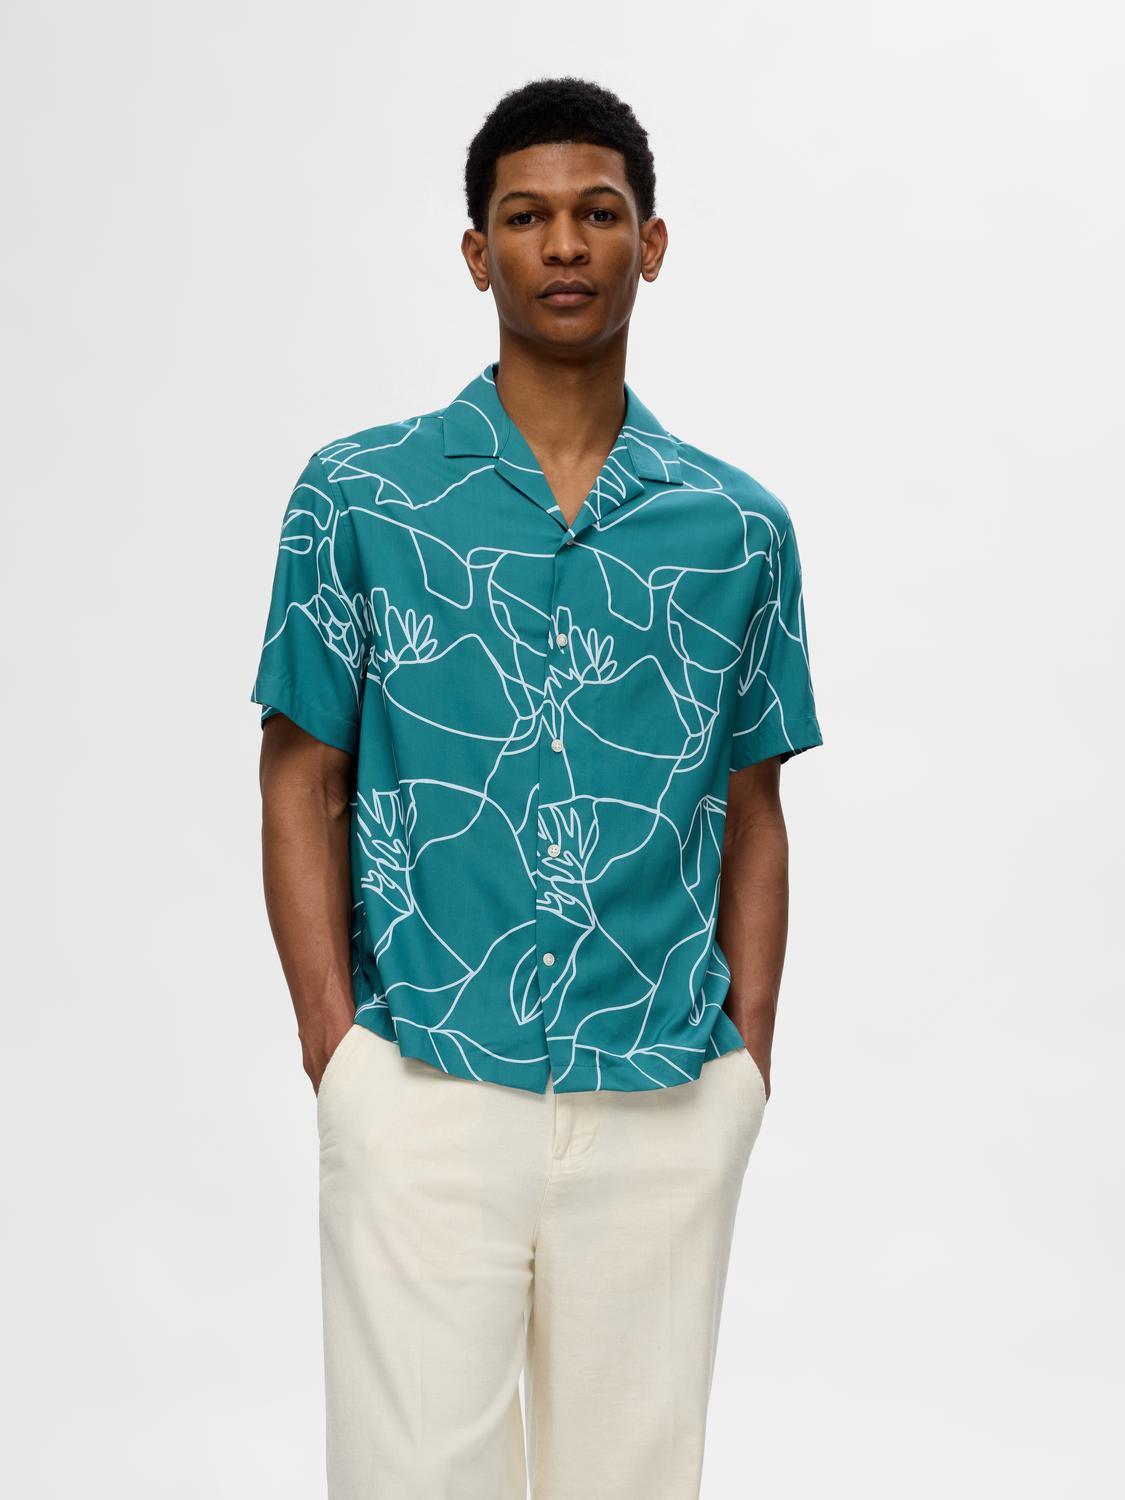 Camisa Selected Relax Rajesh Dragonfly - ECRU